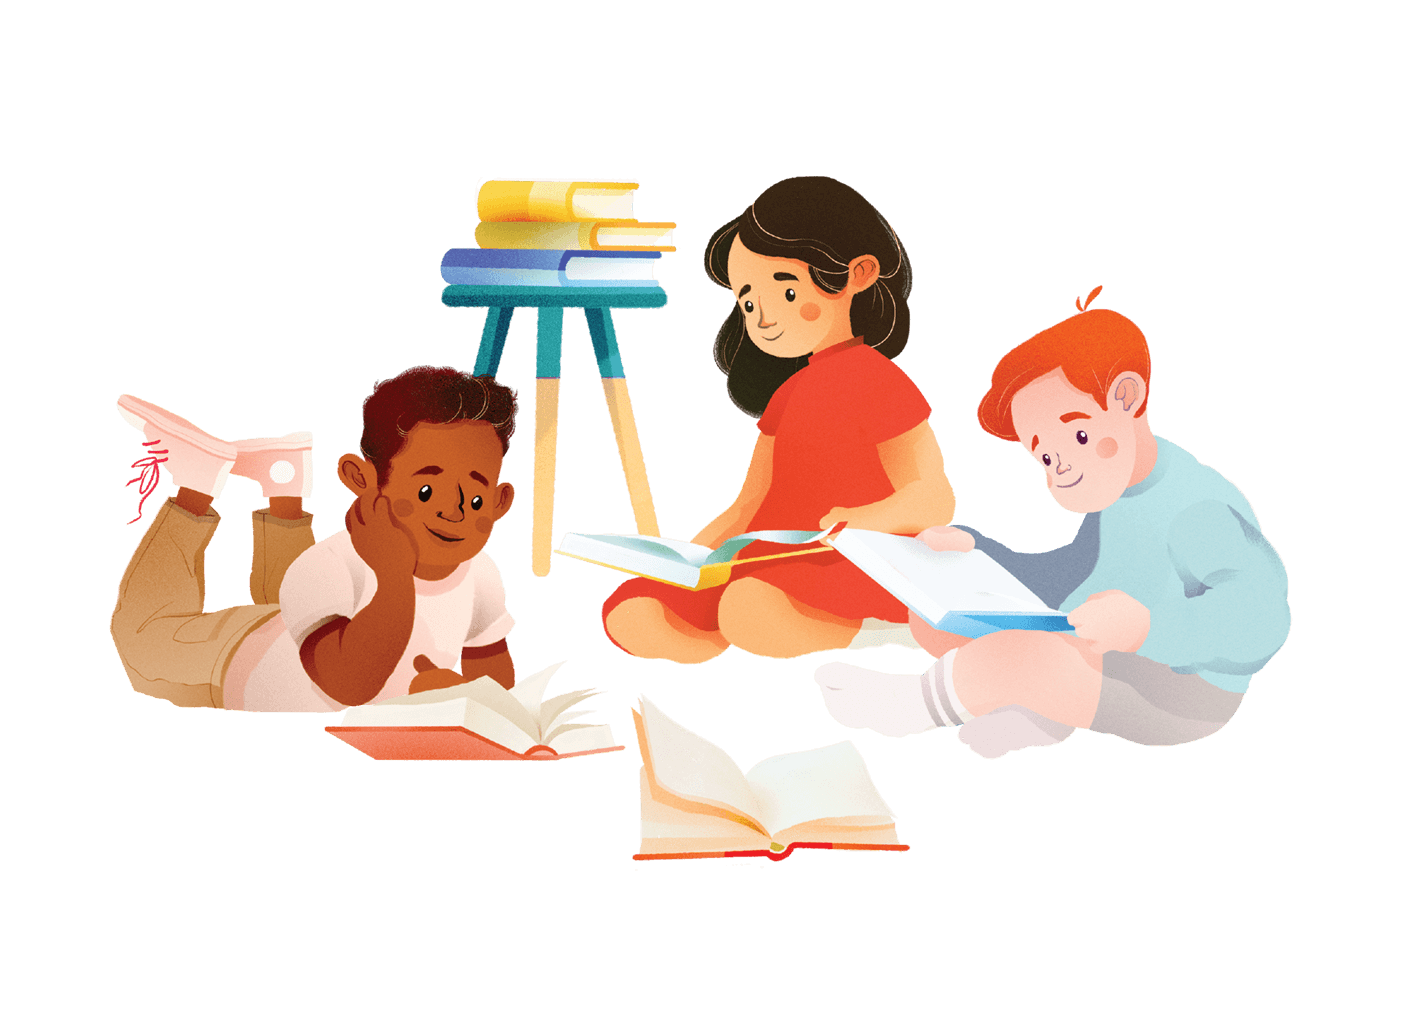 Three children reading books together on the floor, with a stack of books beside them on a small stool.